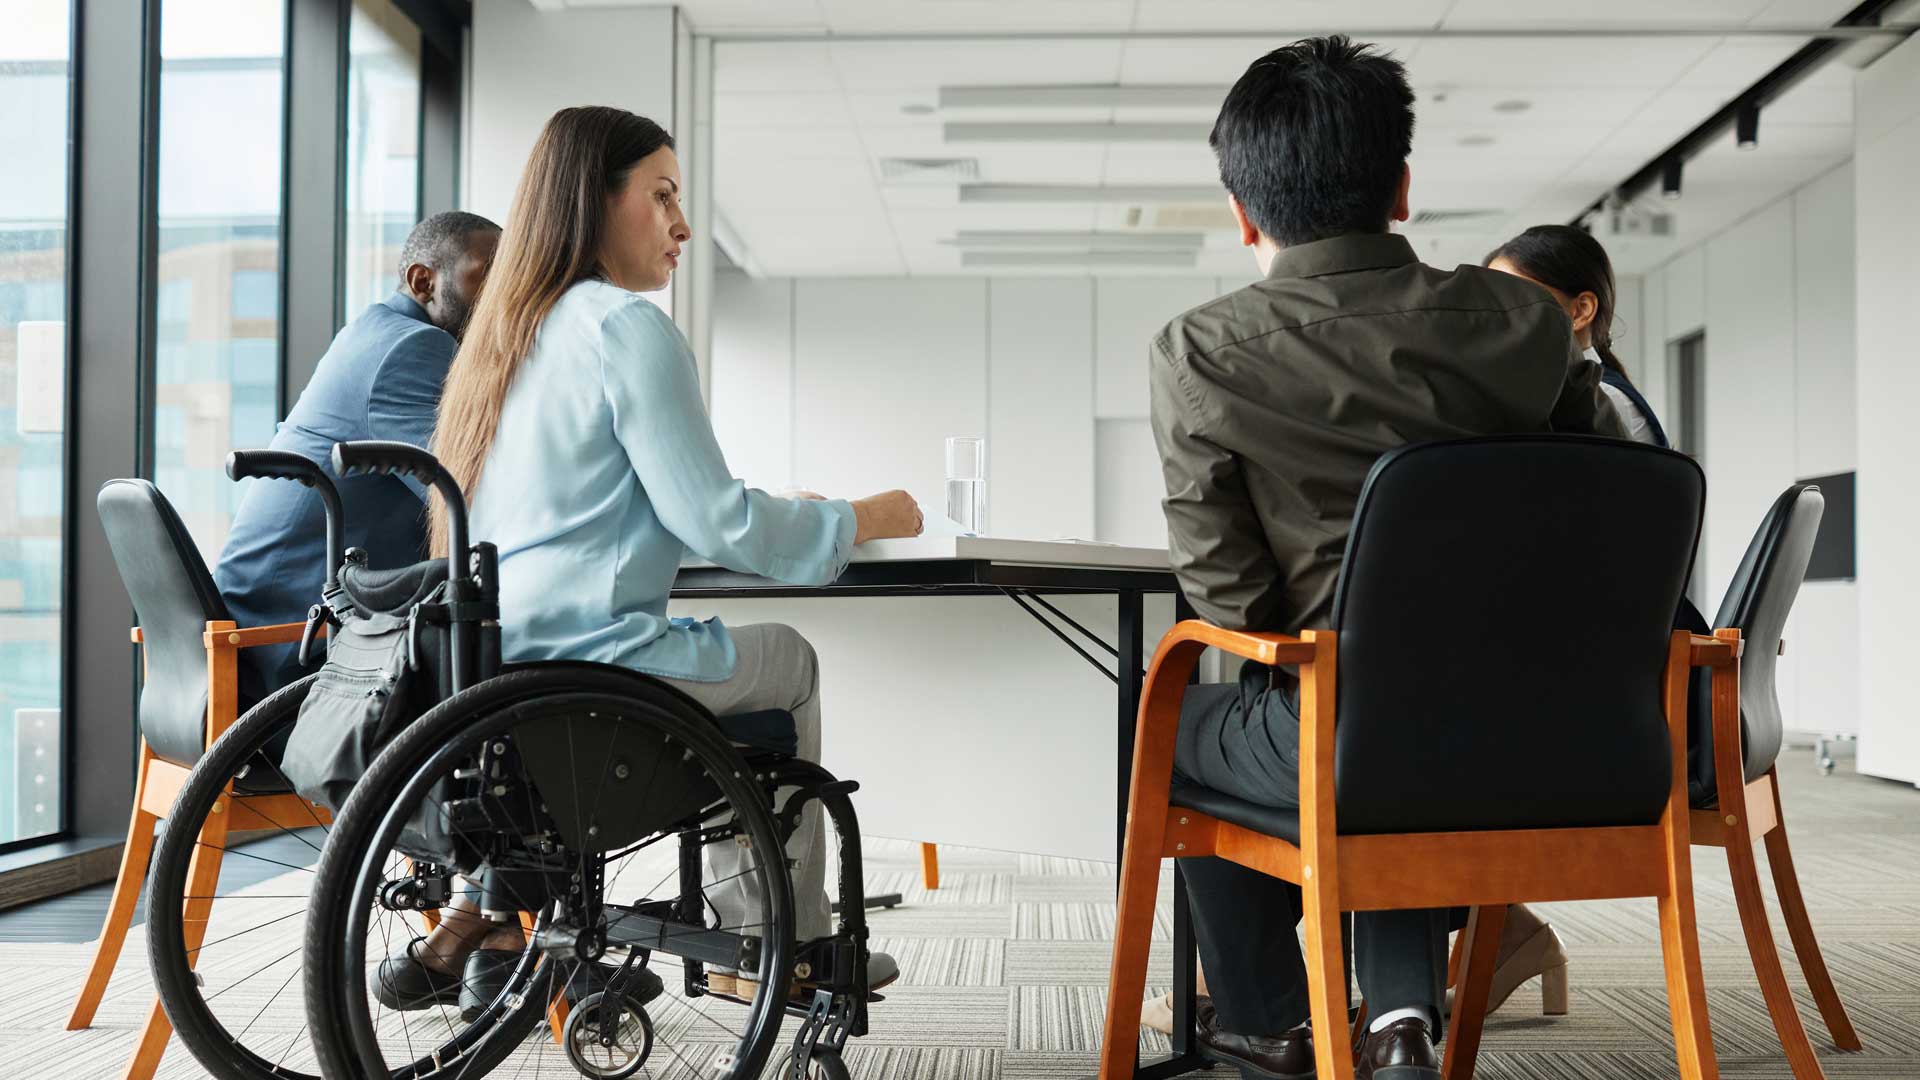 Disabled person discussing accessibility in her workplace